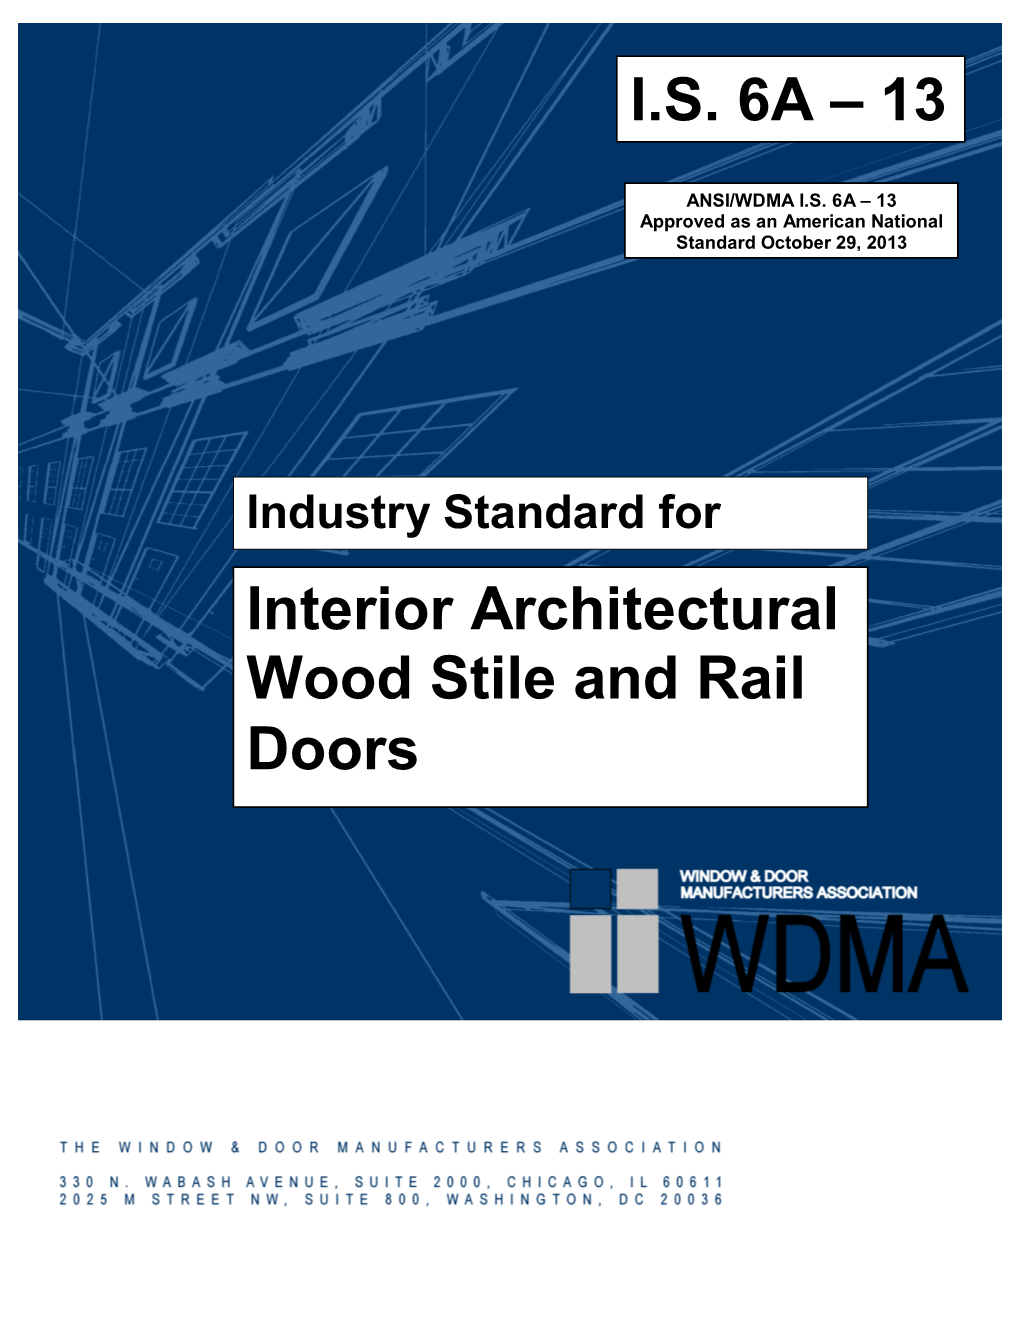 I.S. 6A – 13 Interior Architectural Wood Stile and Rail Doors